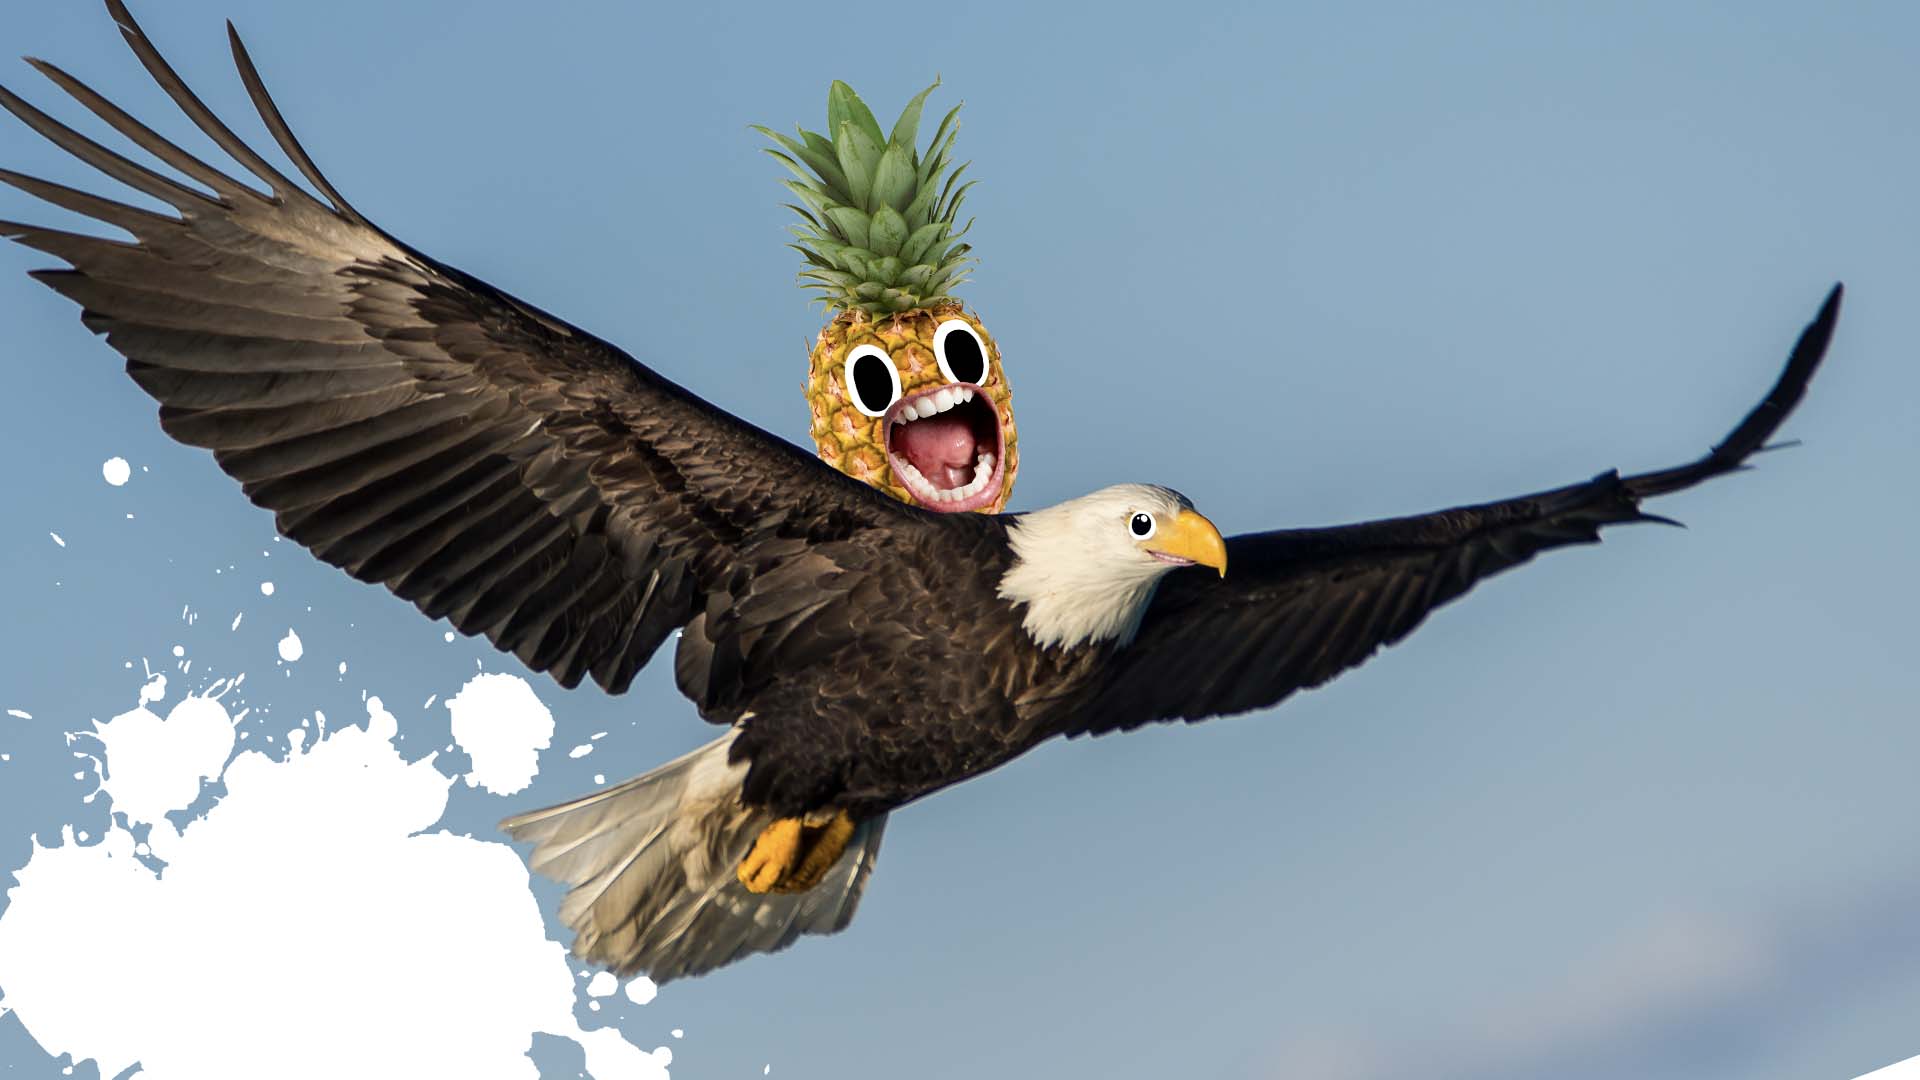 An eagle and a pineapple